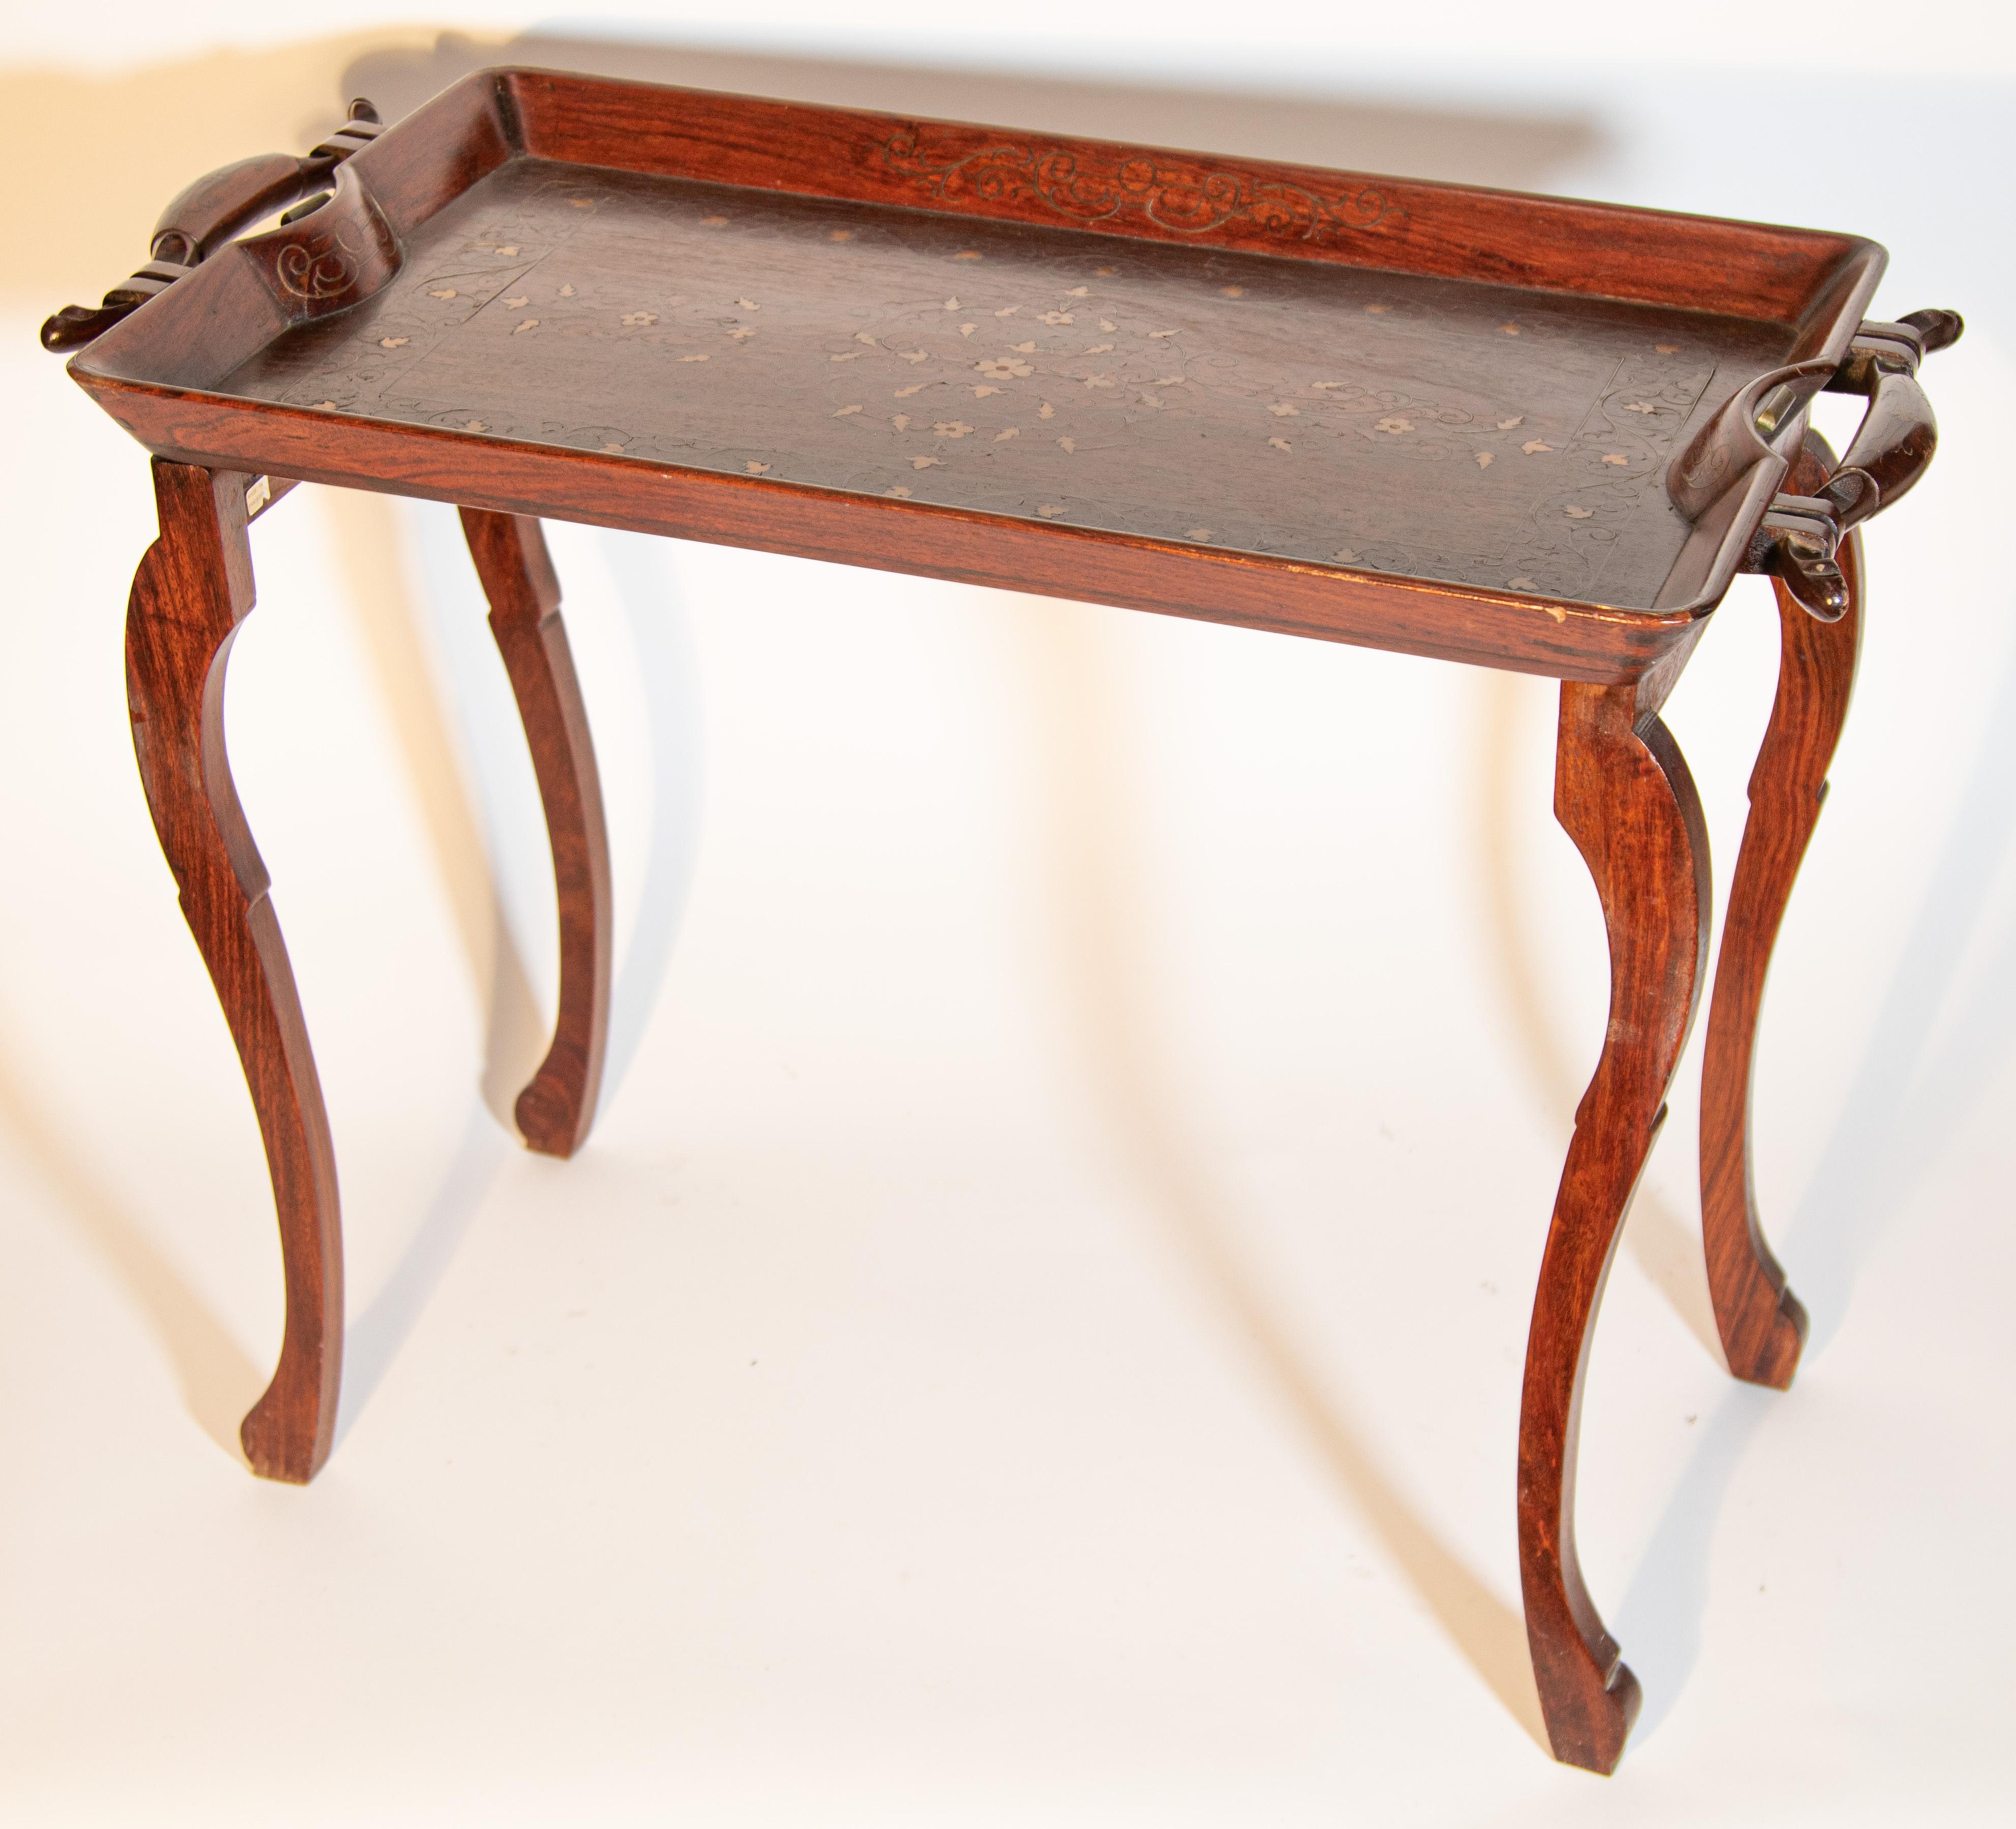 Vintage Anglo-Indian table crafted in rosewood with a tray on top masterfully hand carved and inlaid with delicate floral designs in brass.
Nice Anglo-Indian rosewood inlaid tray table, intricately hand-carved and inlaid with brass.
Anglo Indian